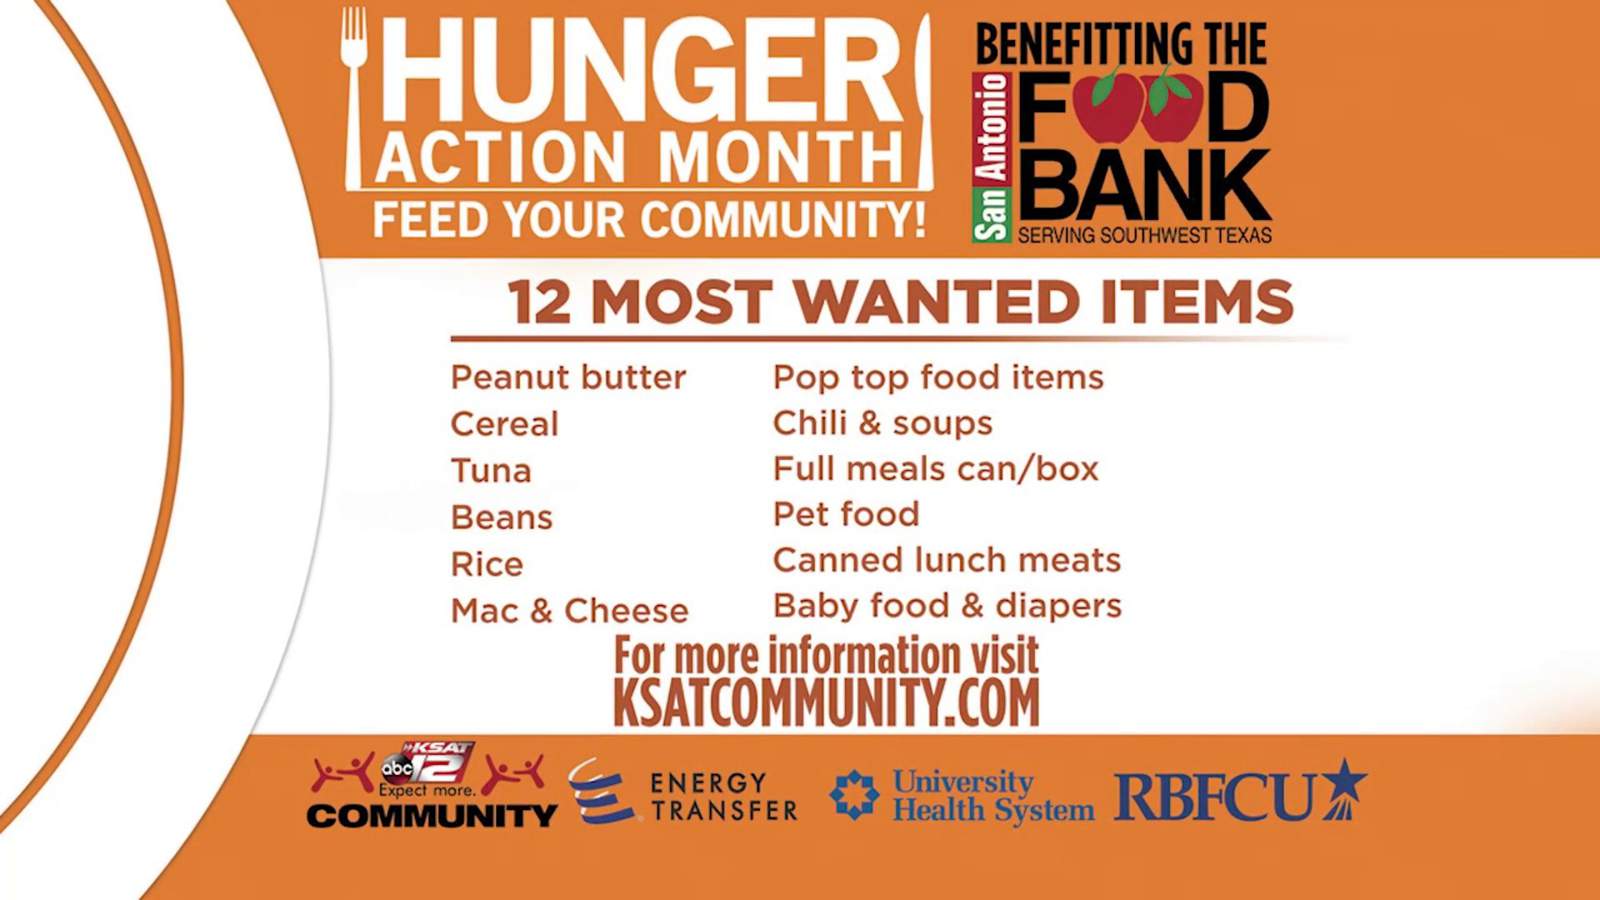 Help feed Bexar County during Hunger Action Month, $1 raised provides 7 meals